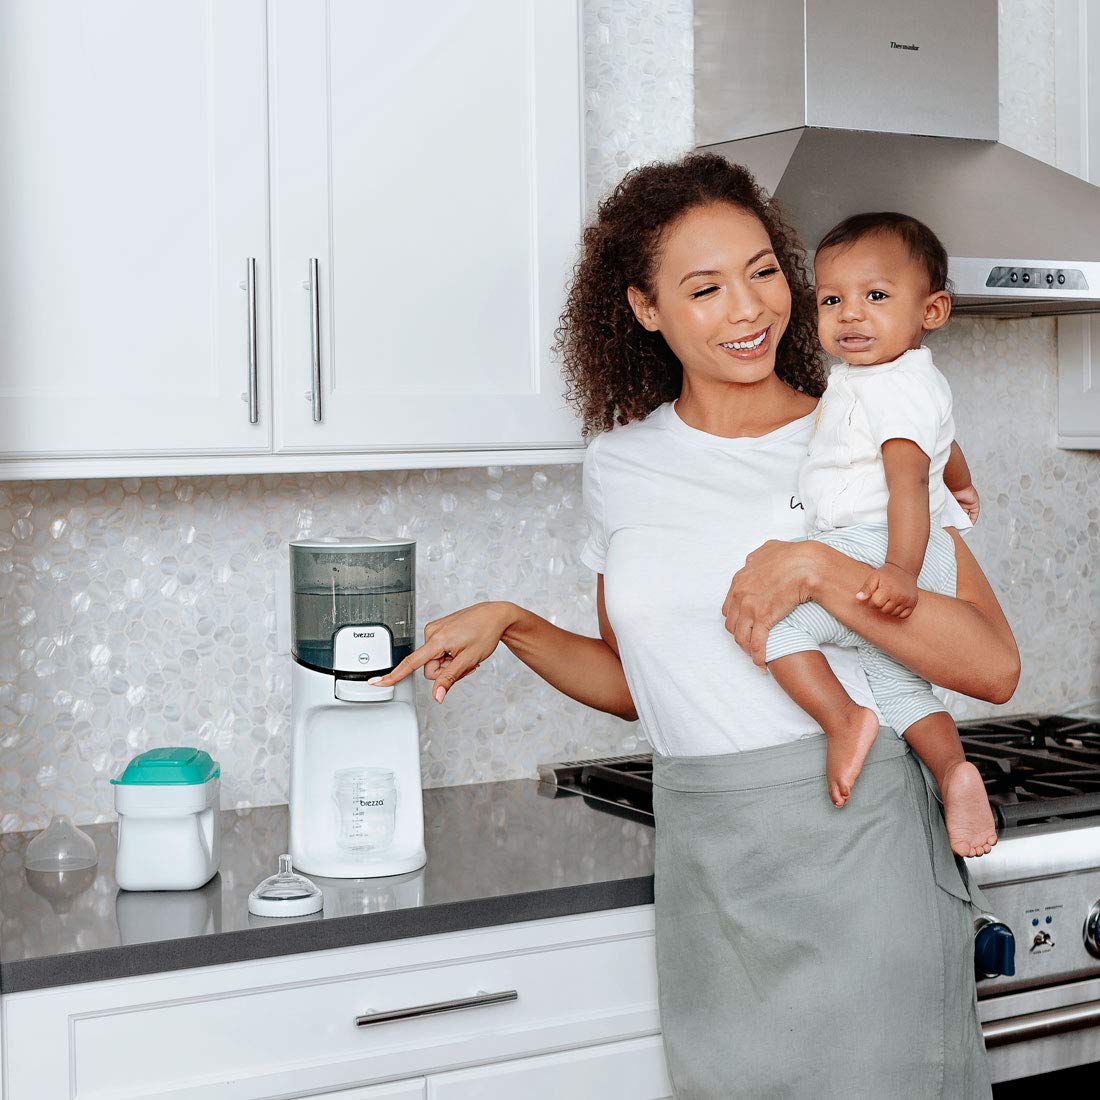 Baby Brezza Instant Warmer - Instantly Dispenses Warm Water at Perfect Baby Bottle Temperature